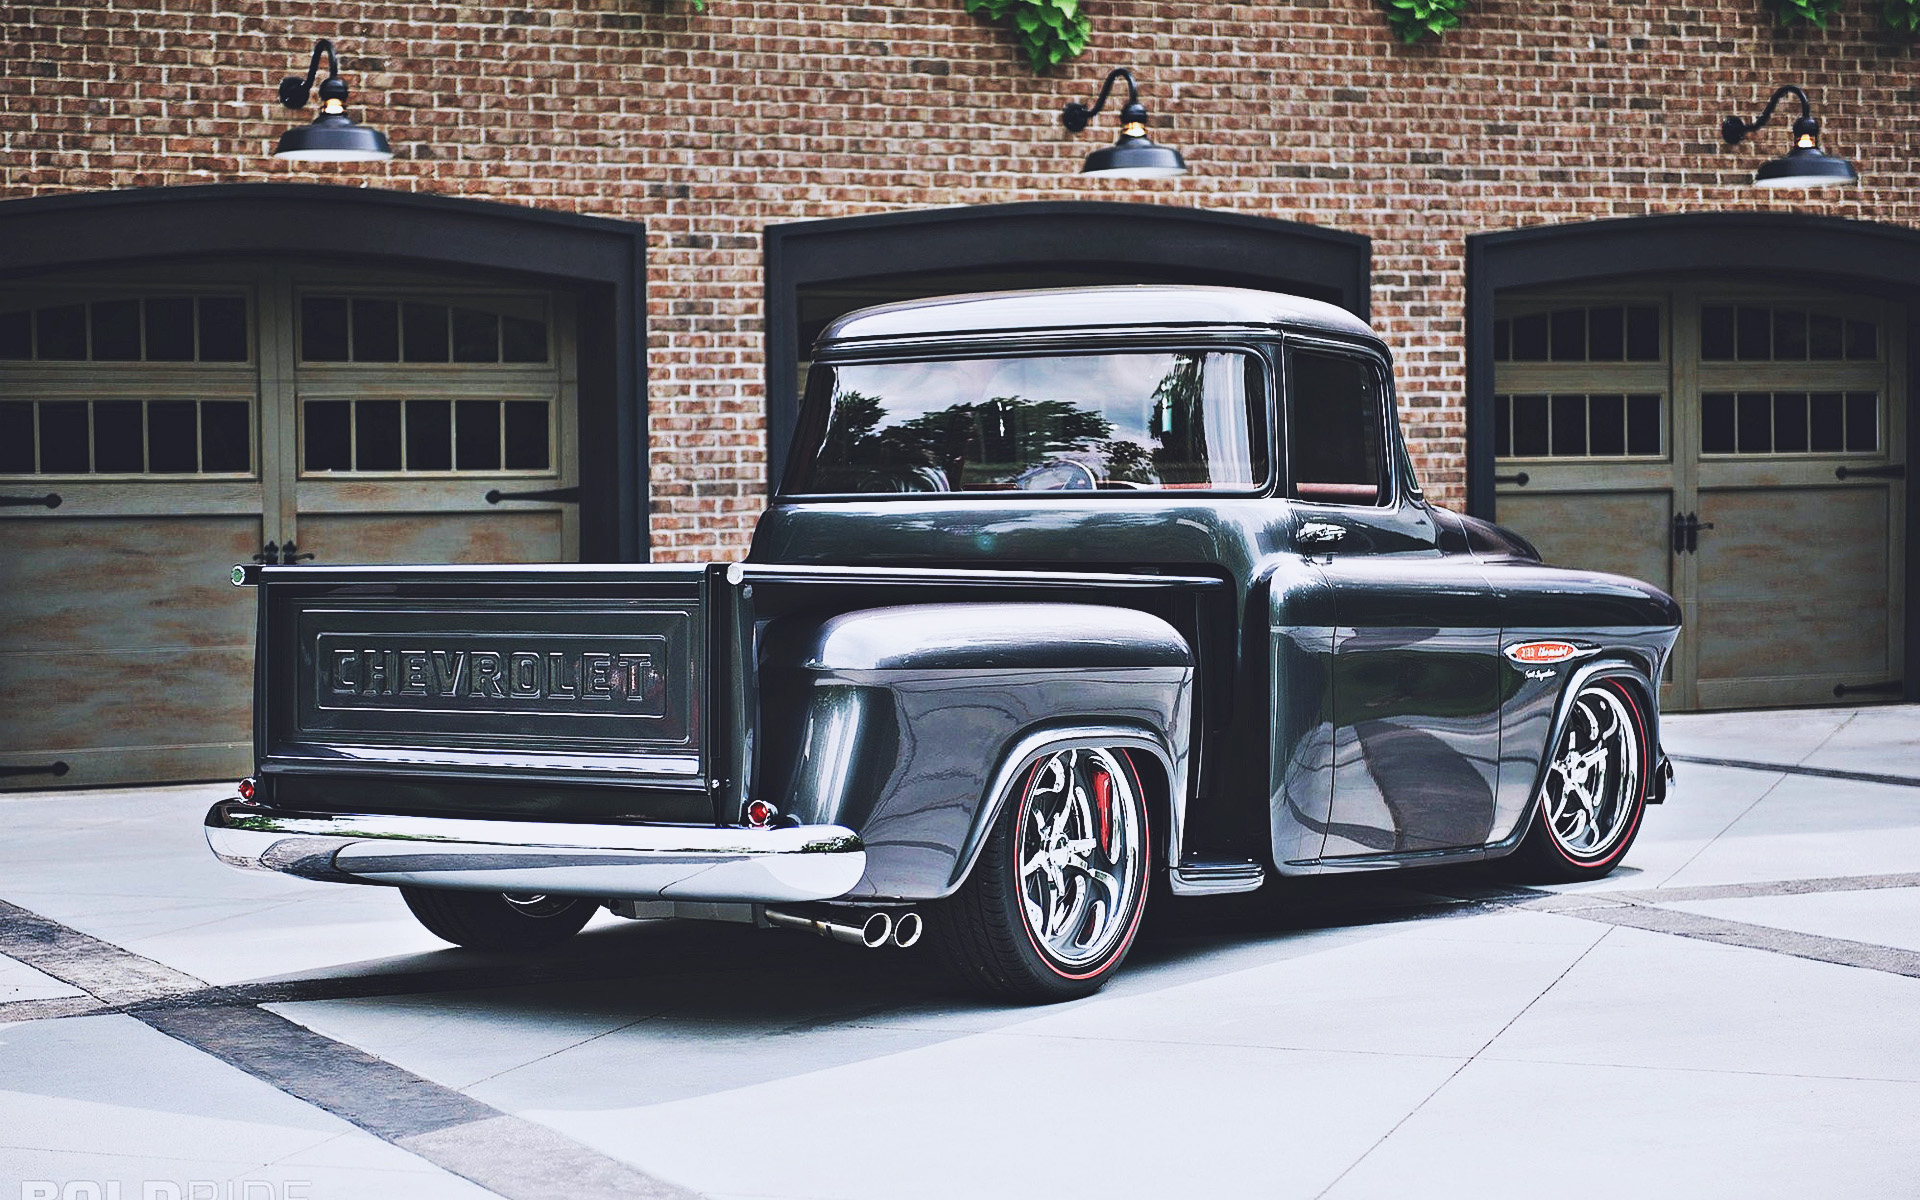 Download wallpapers Chevrolet 3100, retro cars, 1950 cars, tuning, low ride...